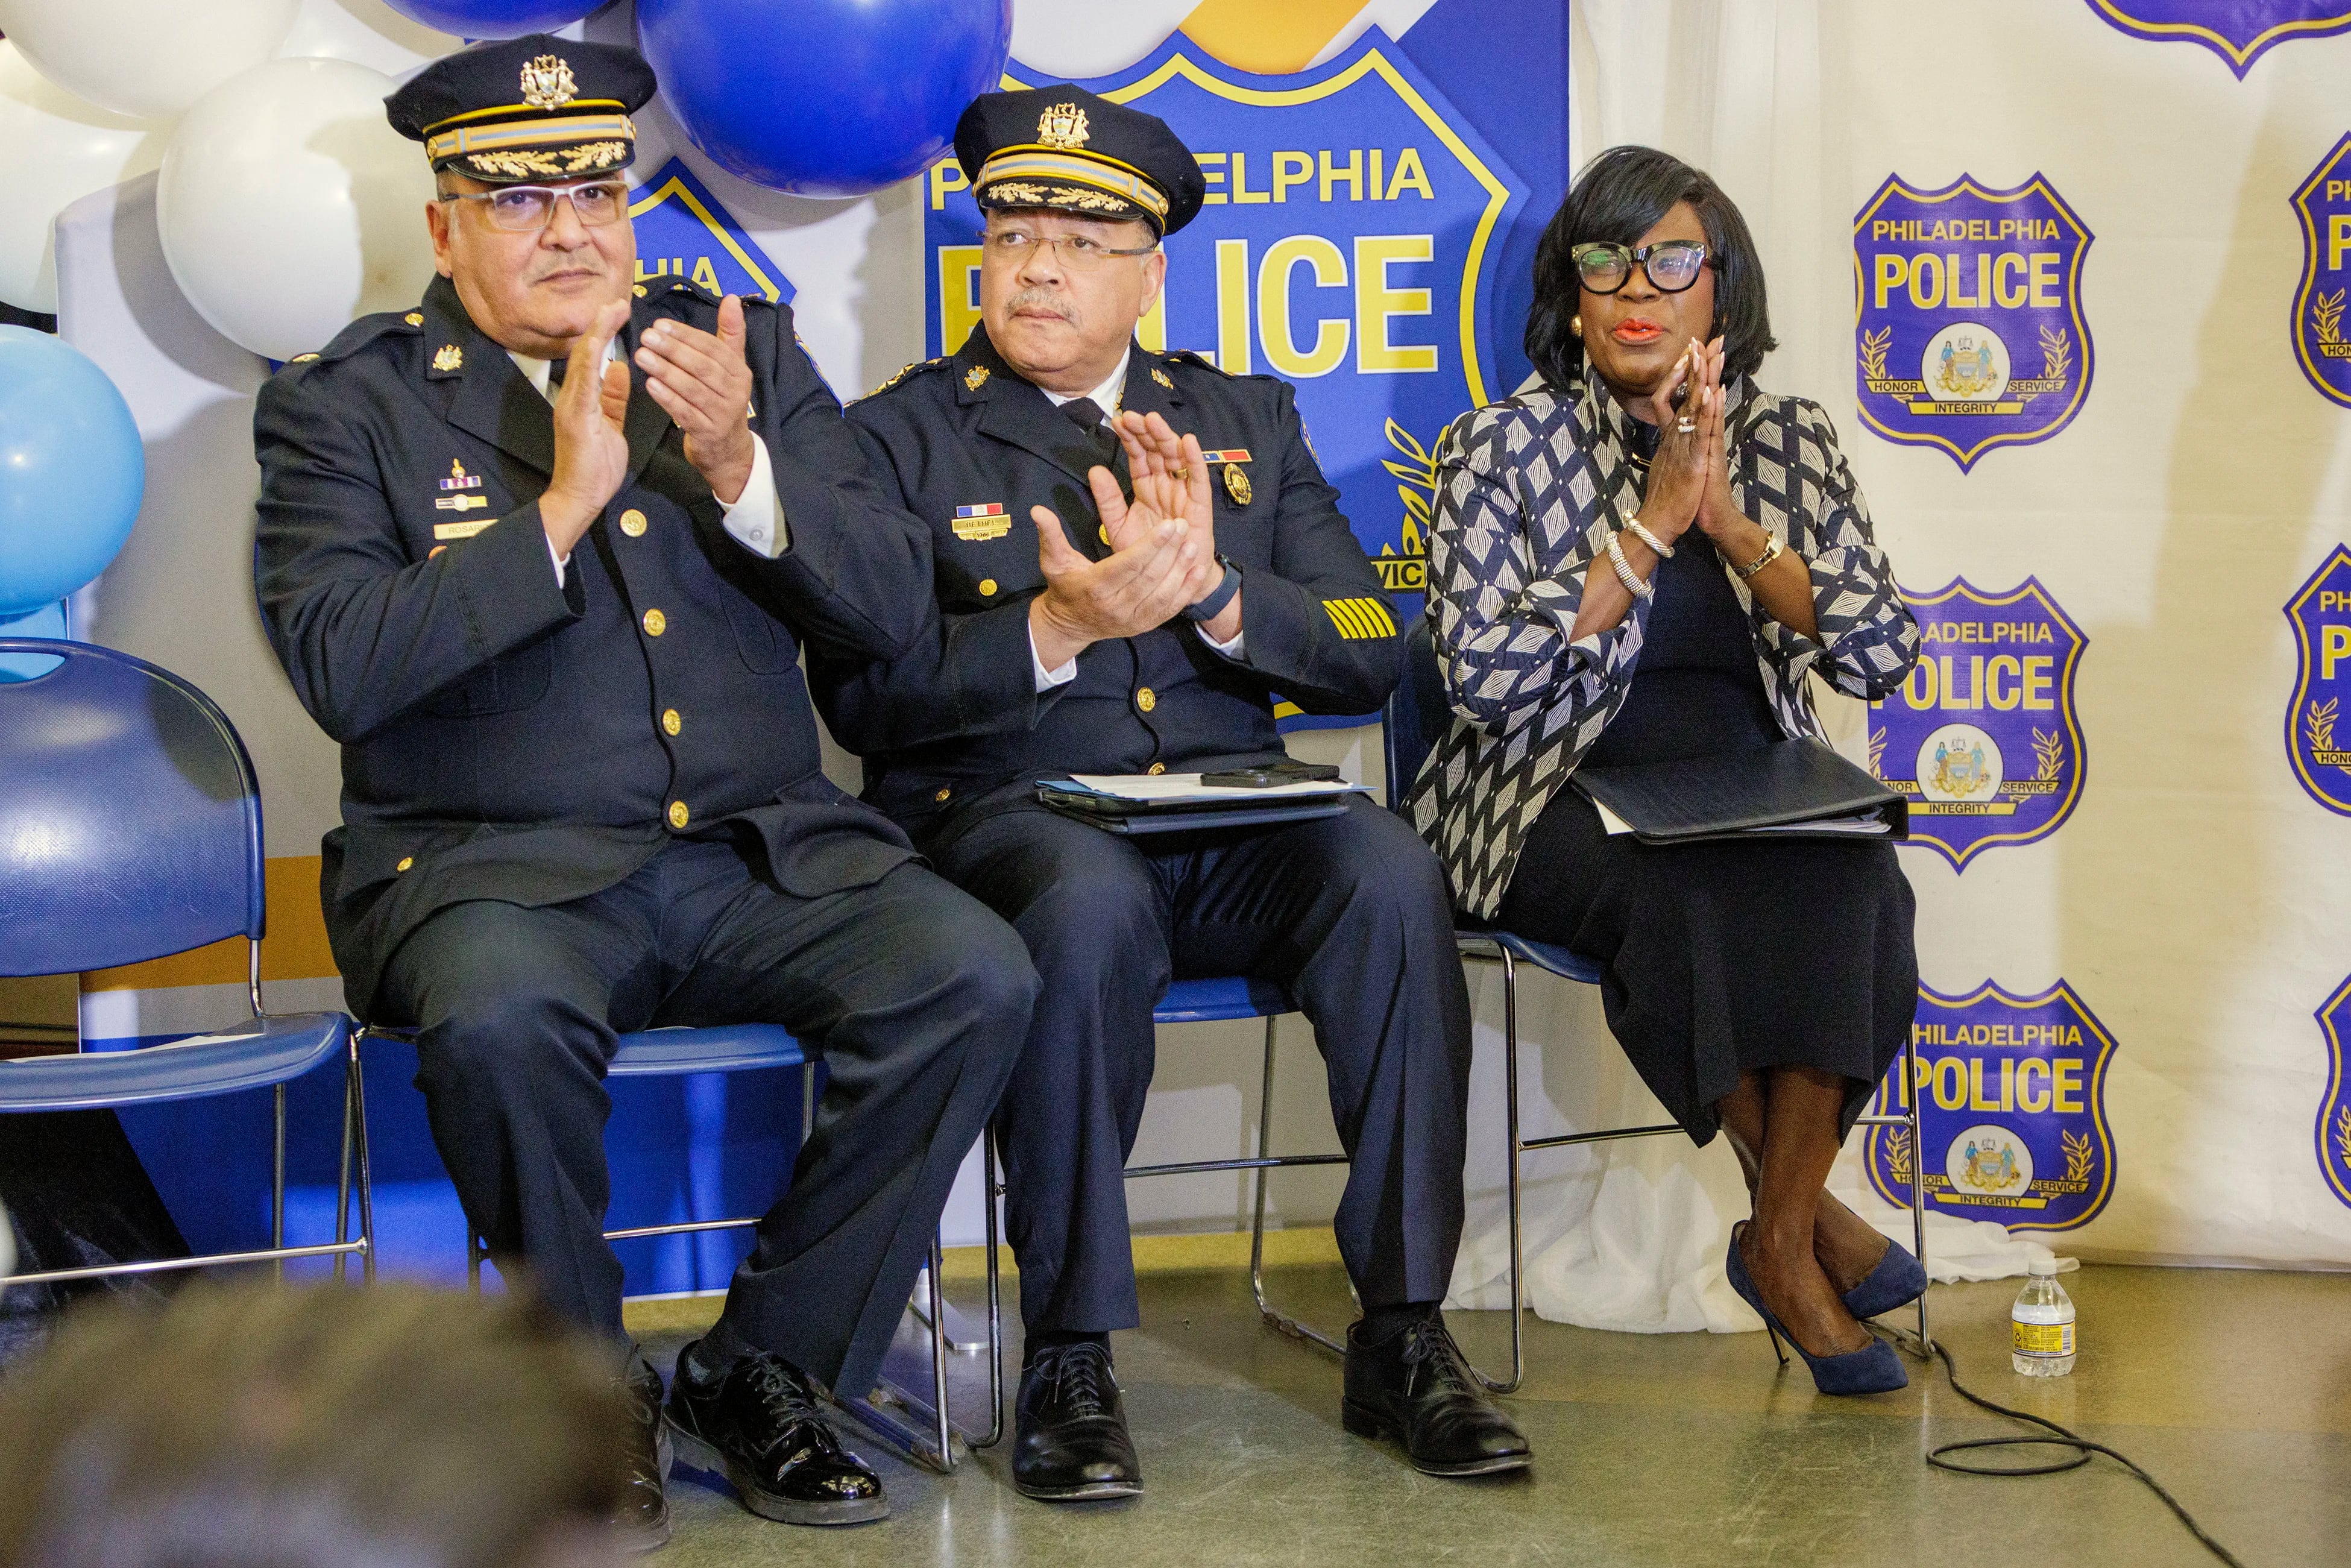 Pedro Rosario, deputy police commissioner for the Kensington Initiative, Police Commissioner Kevin Bethel, and Mayor Cherelle L. Parker. 